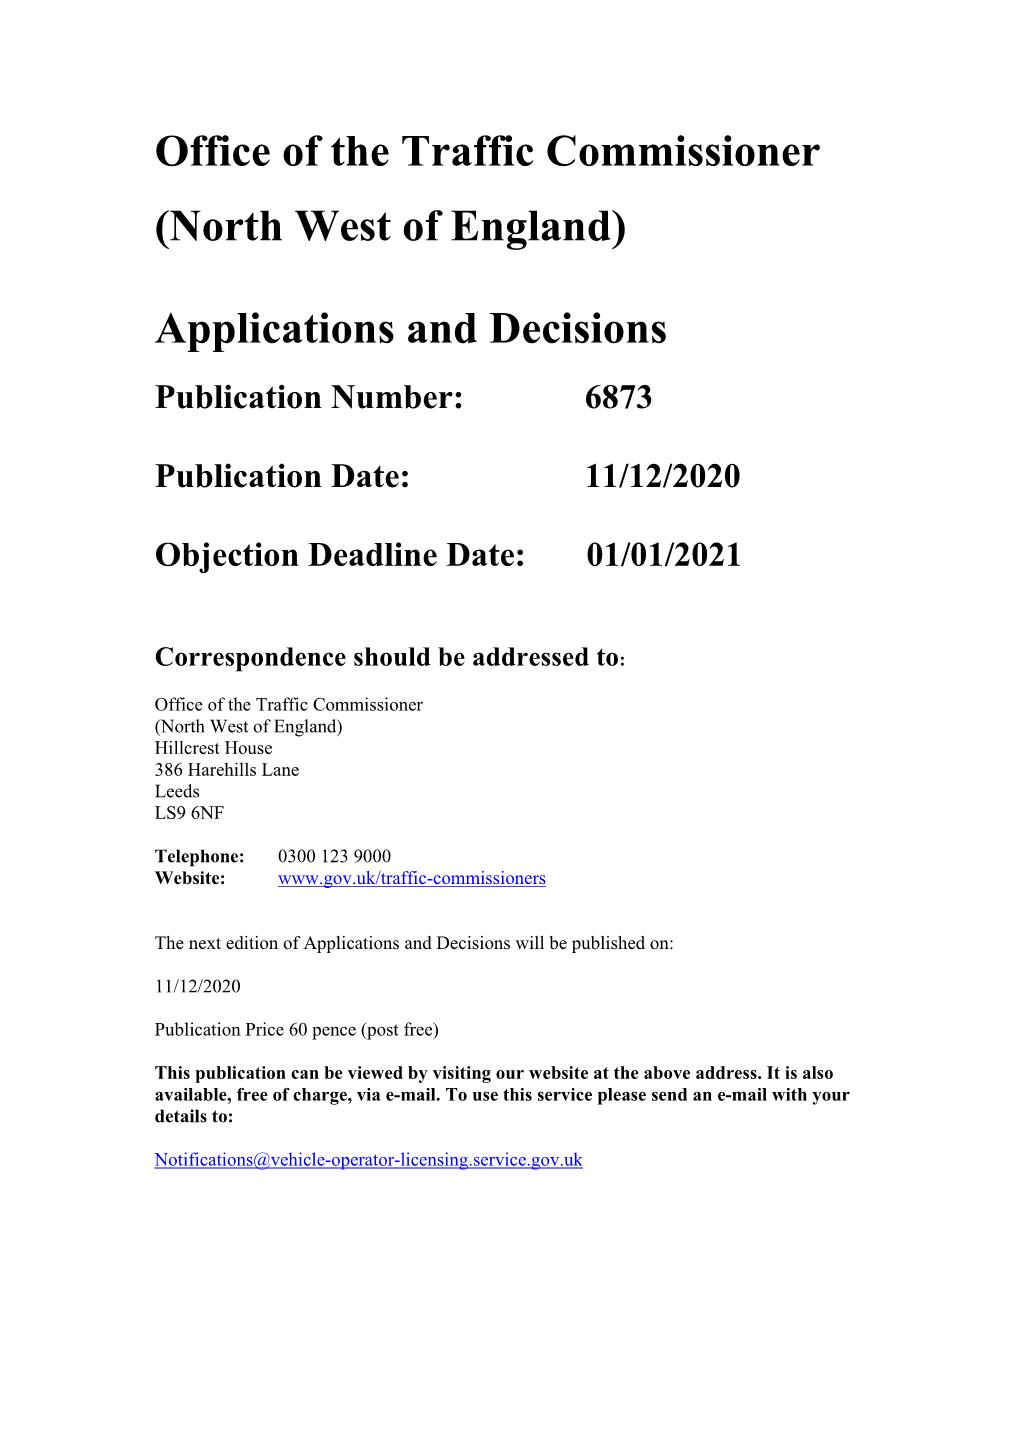 Applications and Decisions for the North West of England 6873